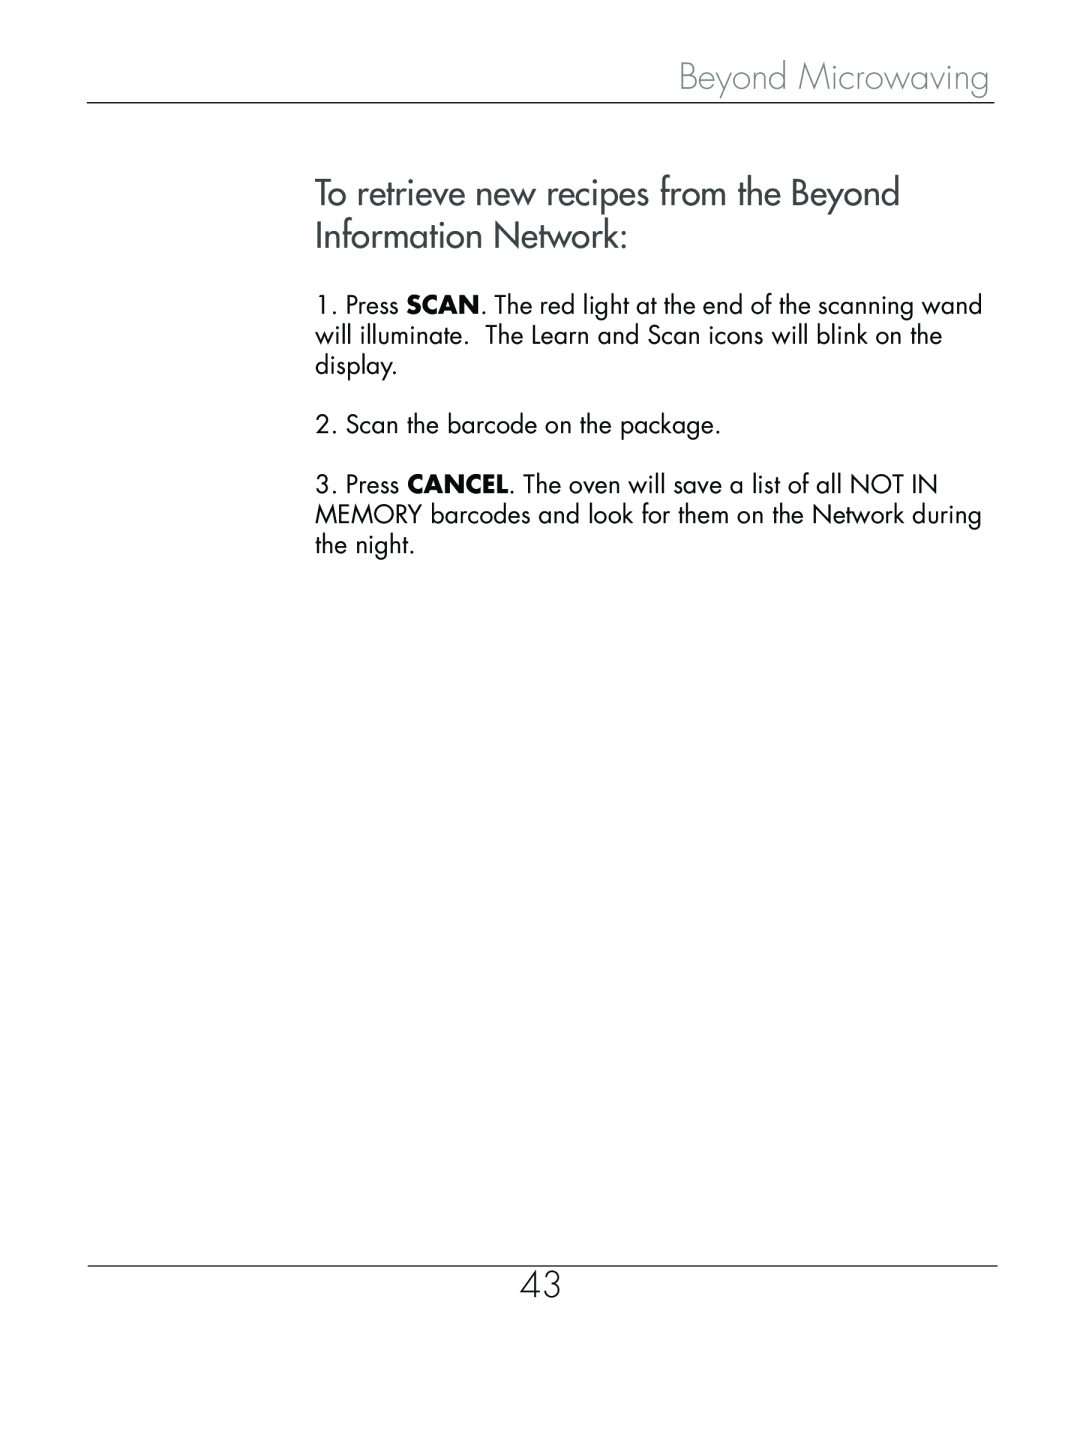 Beyond Microwace Oven manual To retrieve new recipes from the Beyond Information Network, Beyond Microwaving 